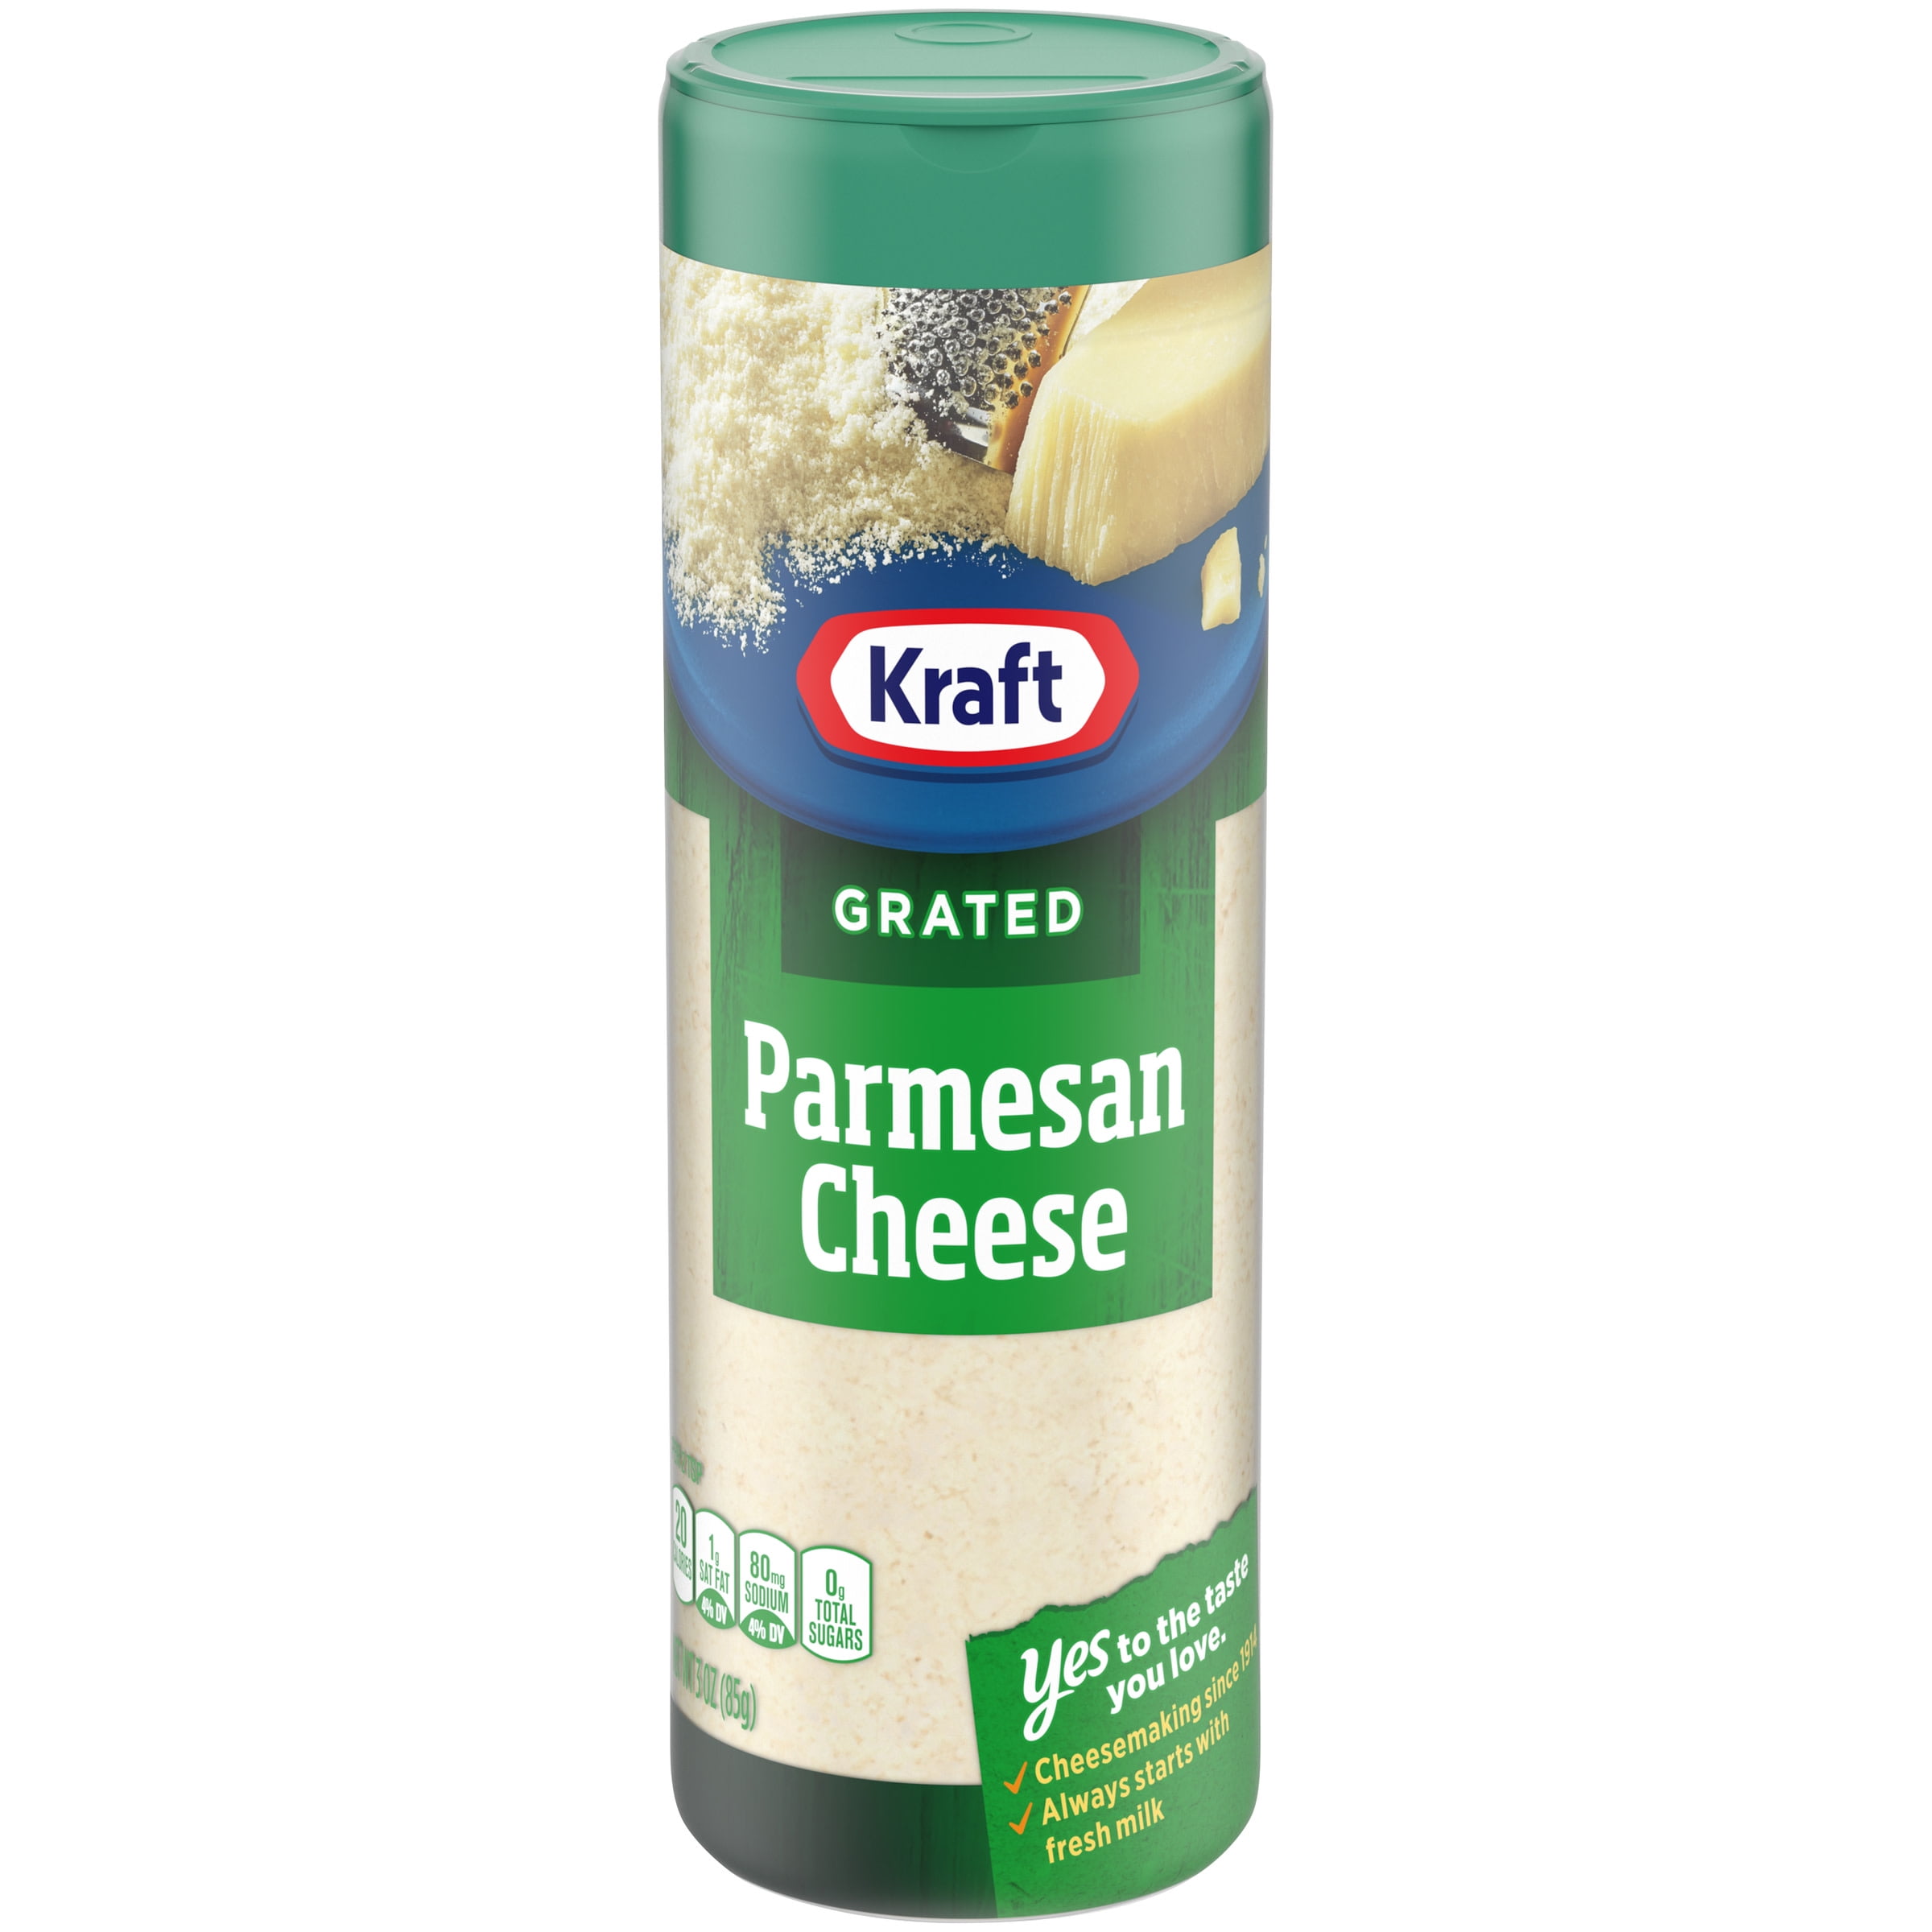 Repurpose Parmesan Cheese Shakers for Pantry Storage - Mission: to Save